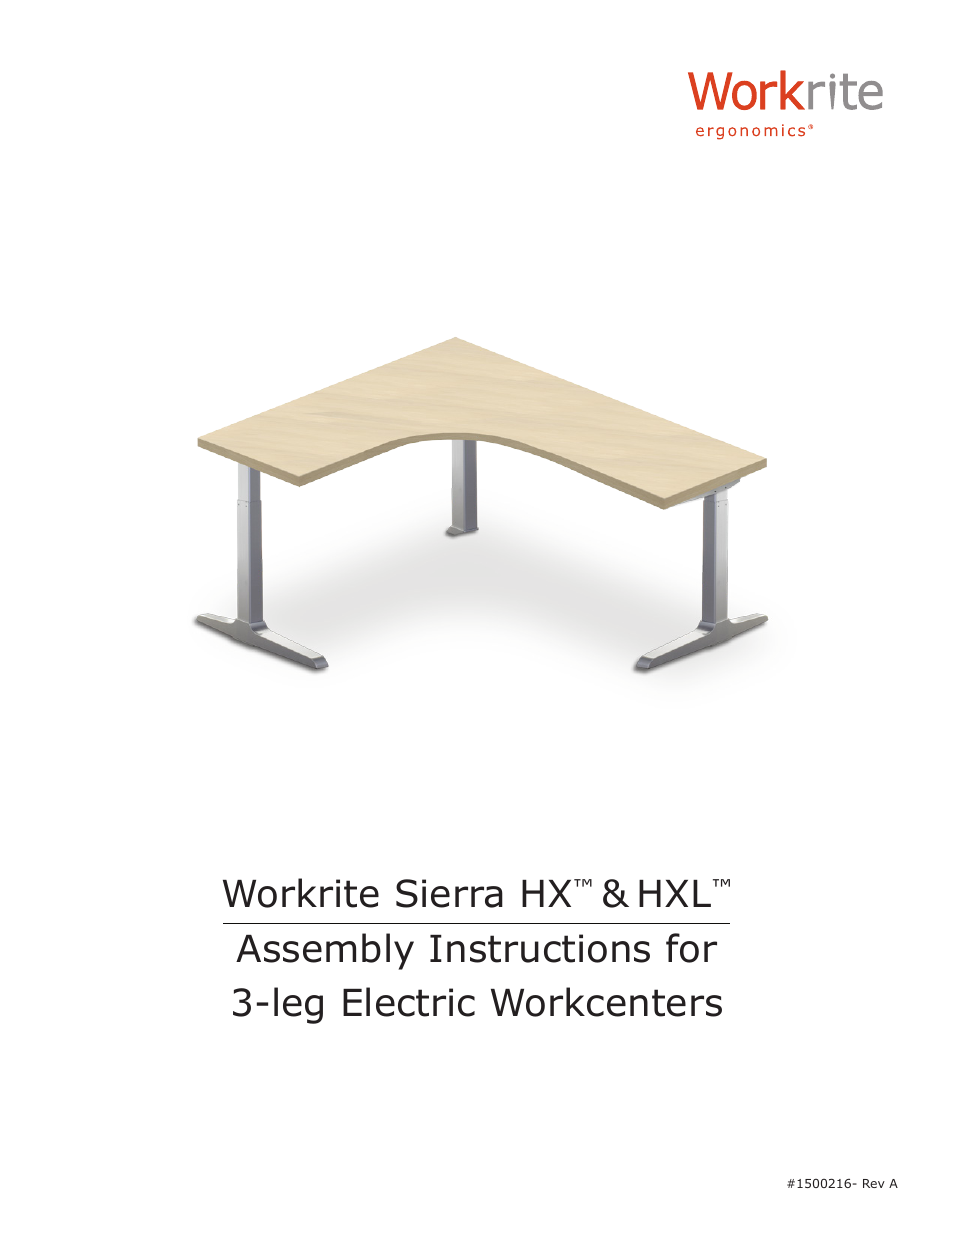 Sierra HX Electric Assembly Instructions for 3-leg Electric Workcenters